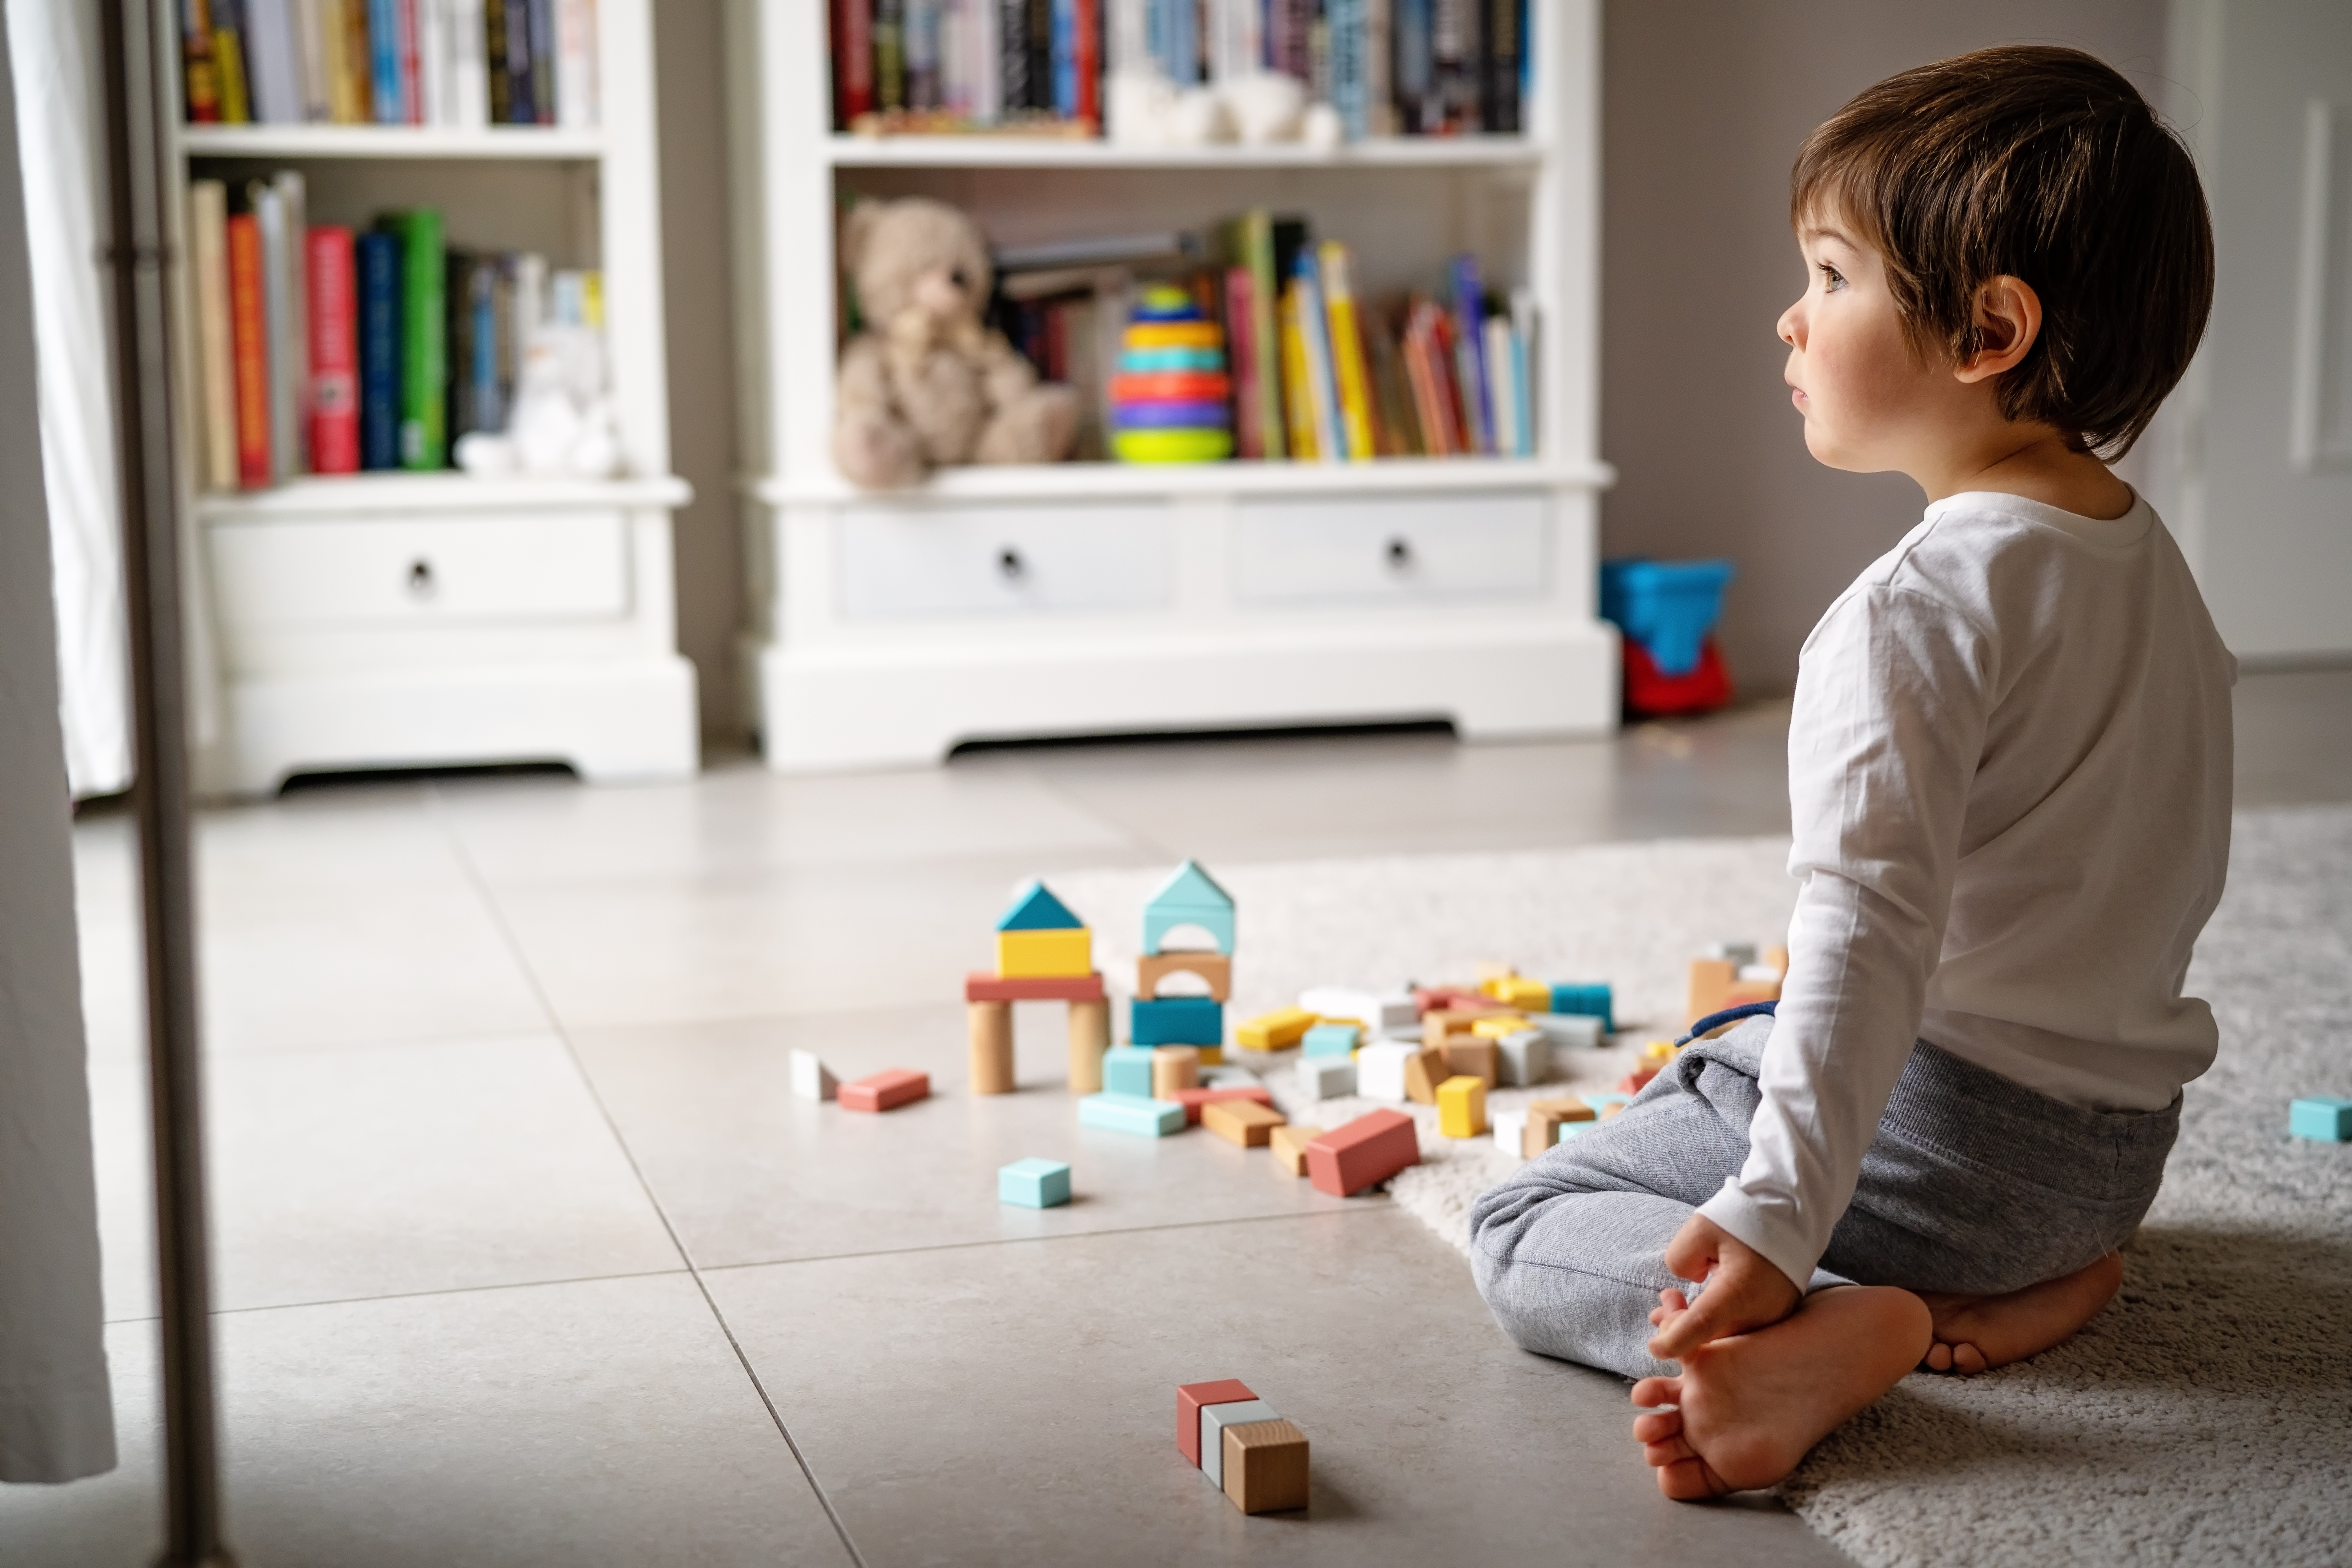 A young boy playing with blocks | Source: Shutterstock